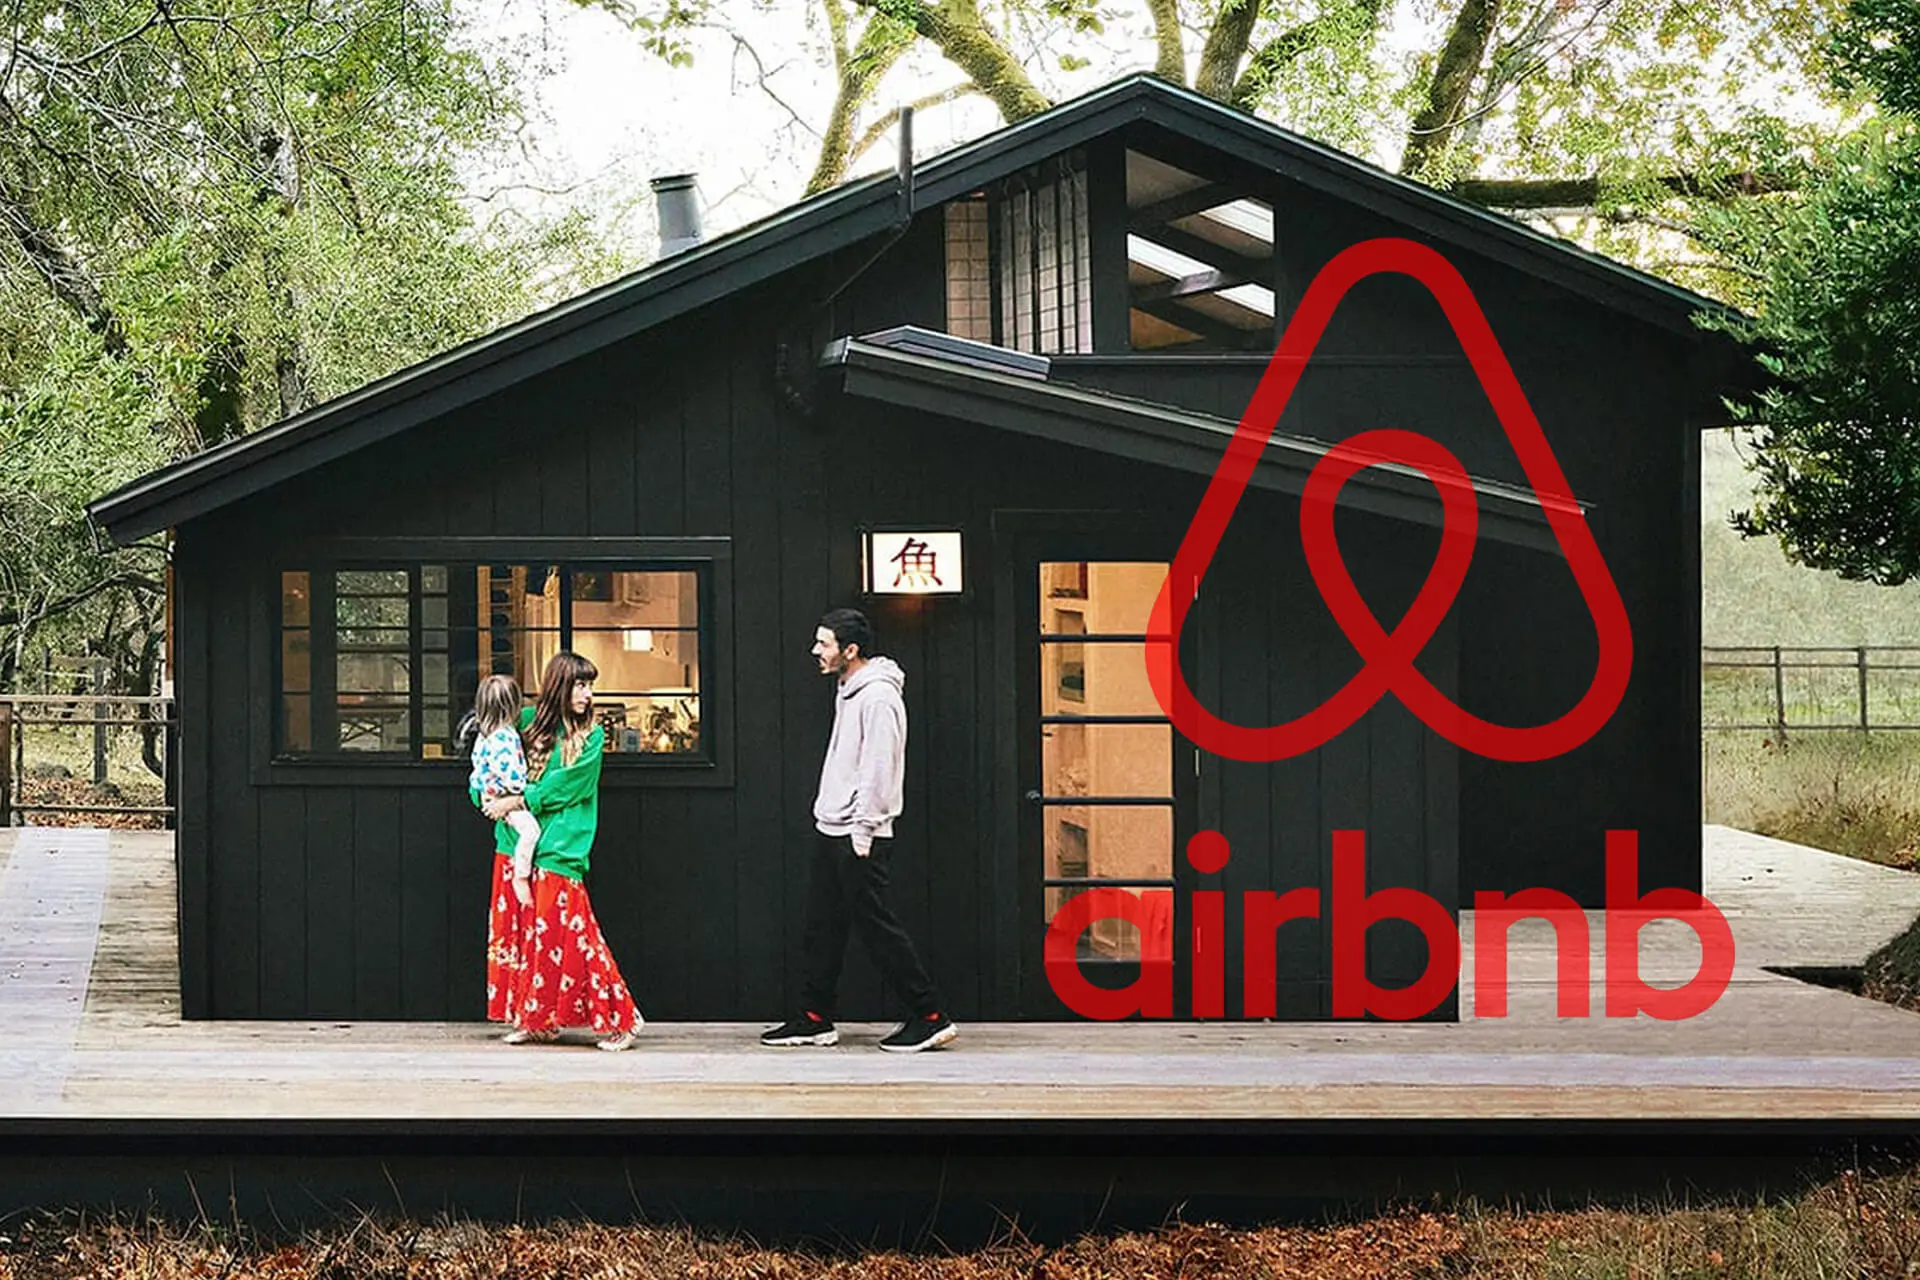 You don't have permission to access this Airbnb resource